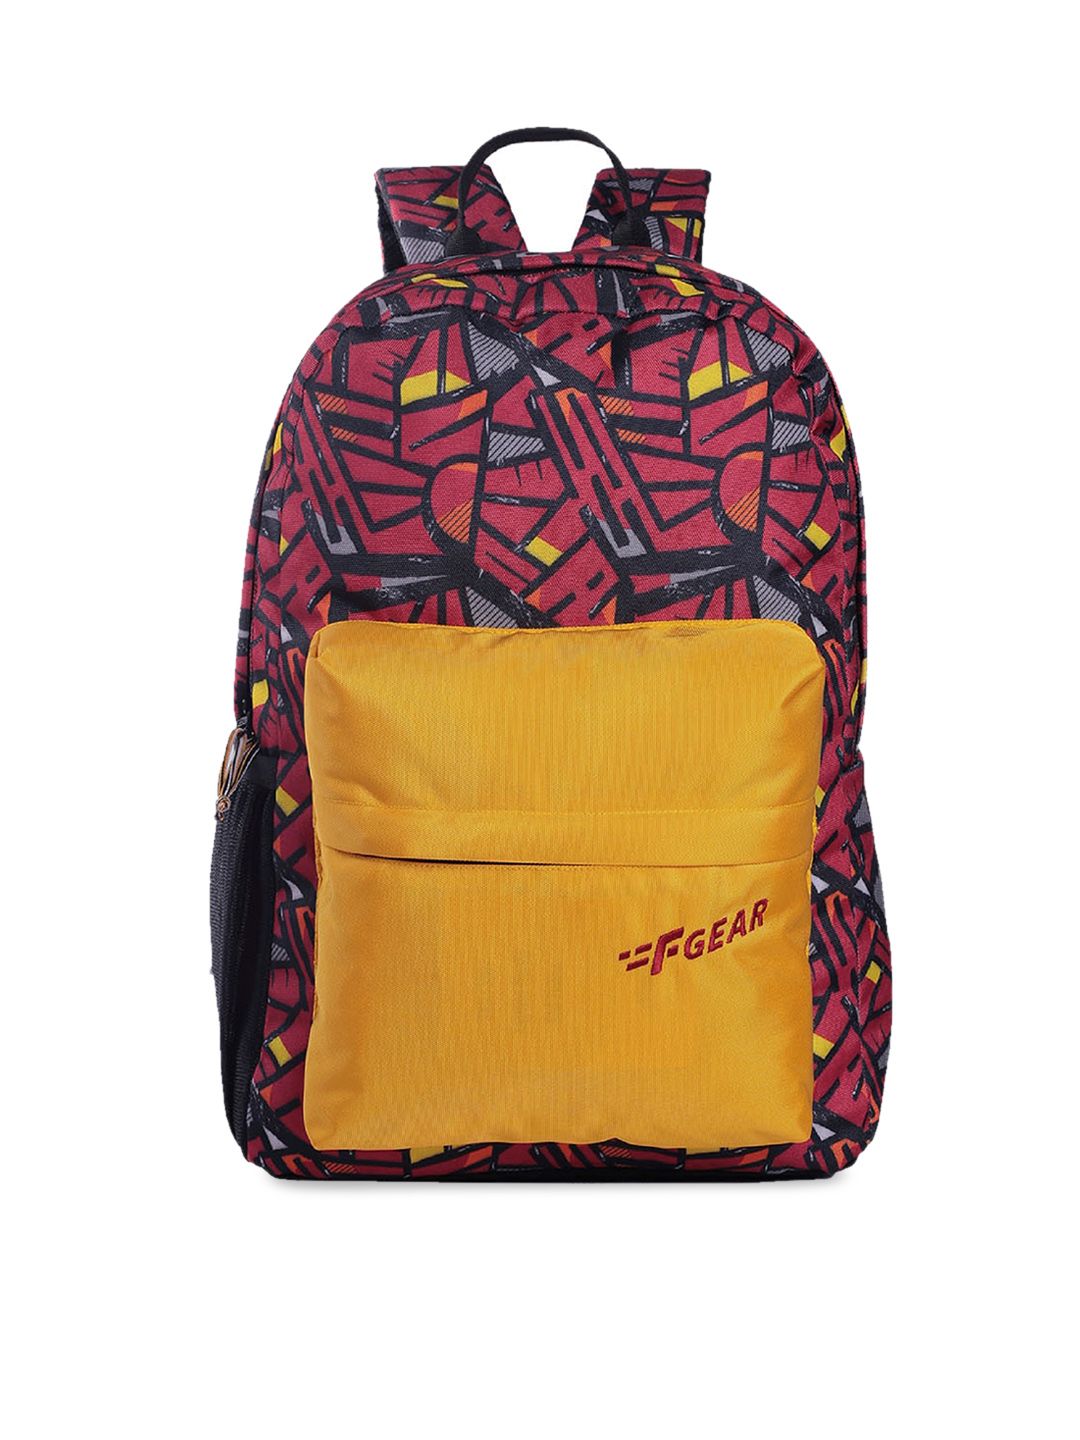 F Gear Unisex Red & Yellow Colourblocked Backpack Price in India